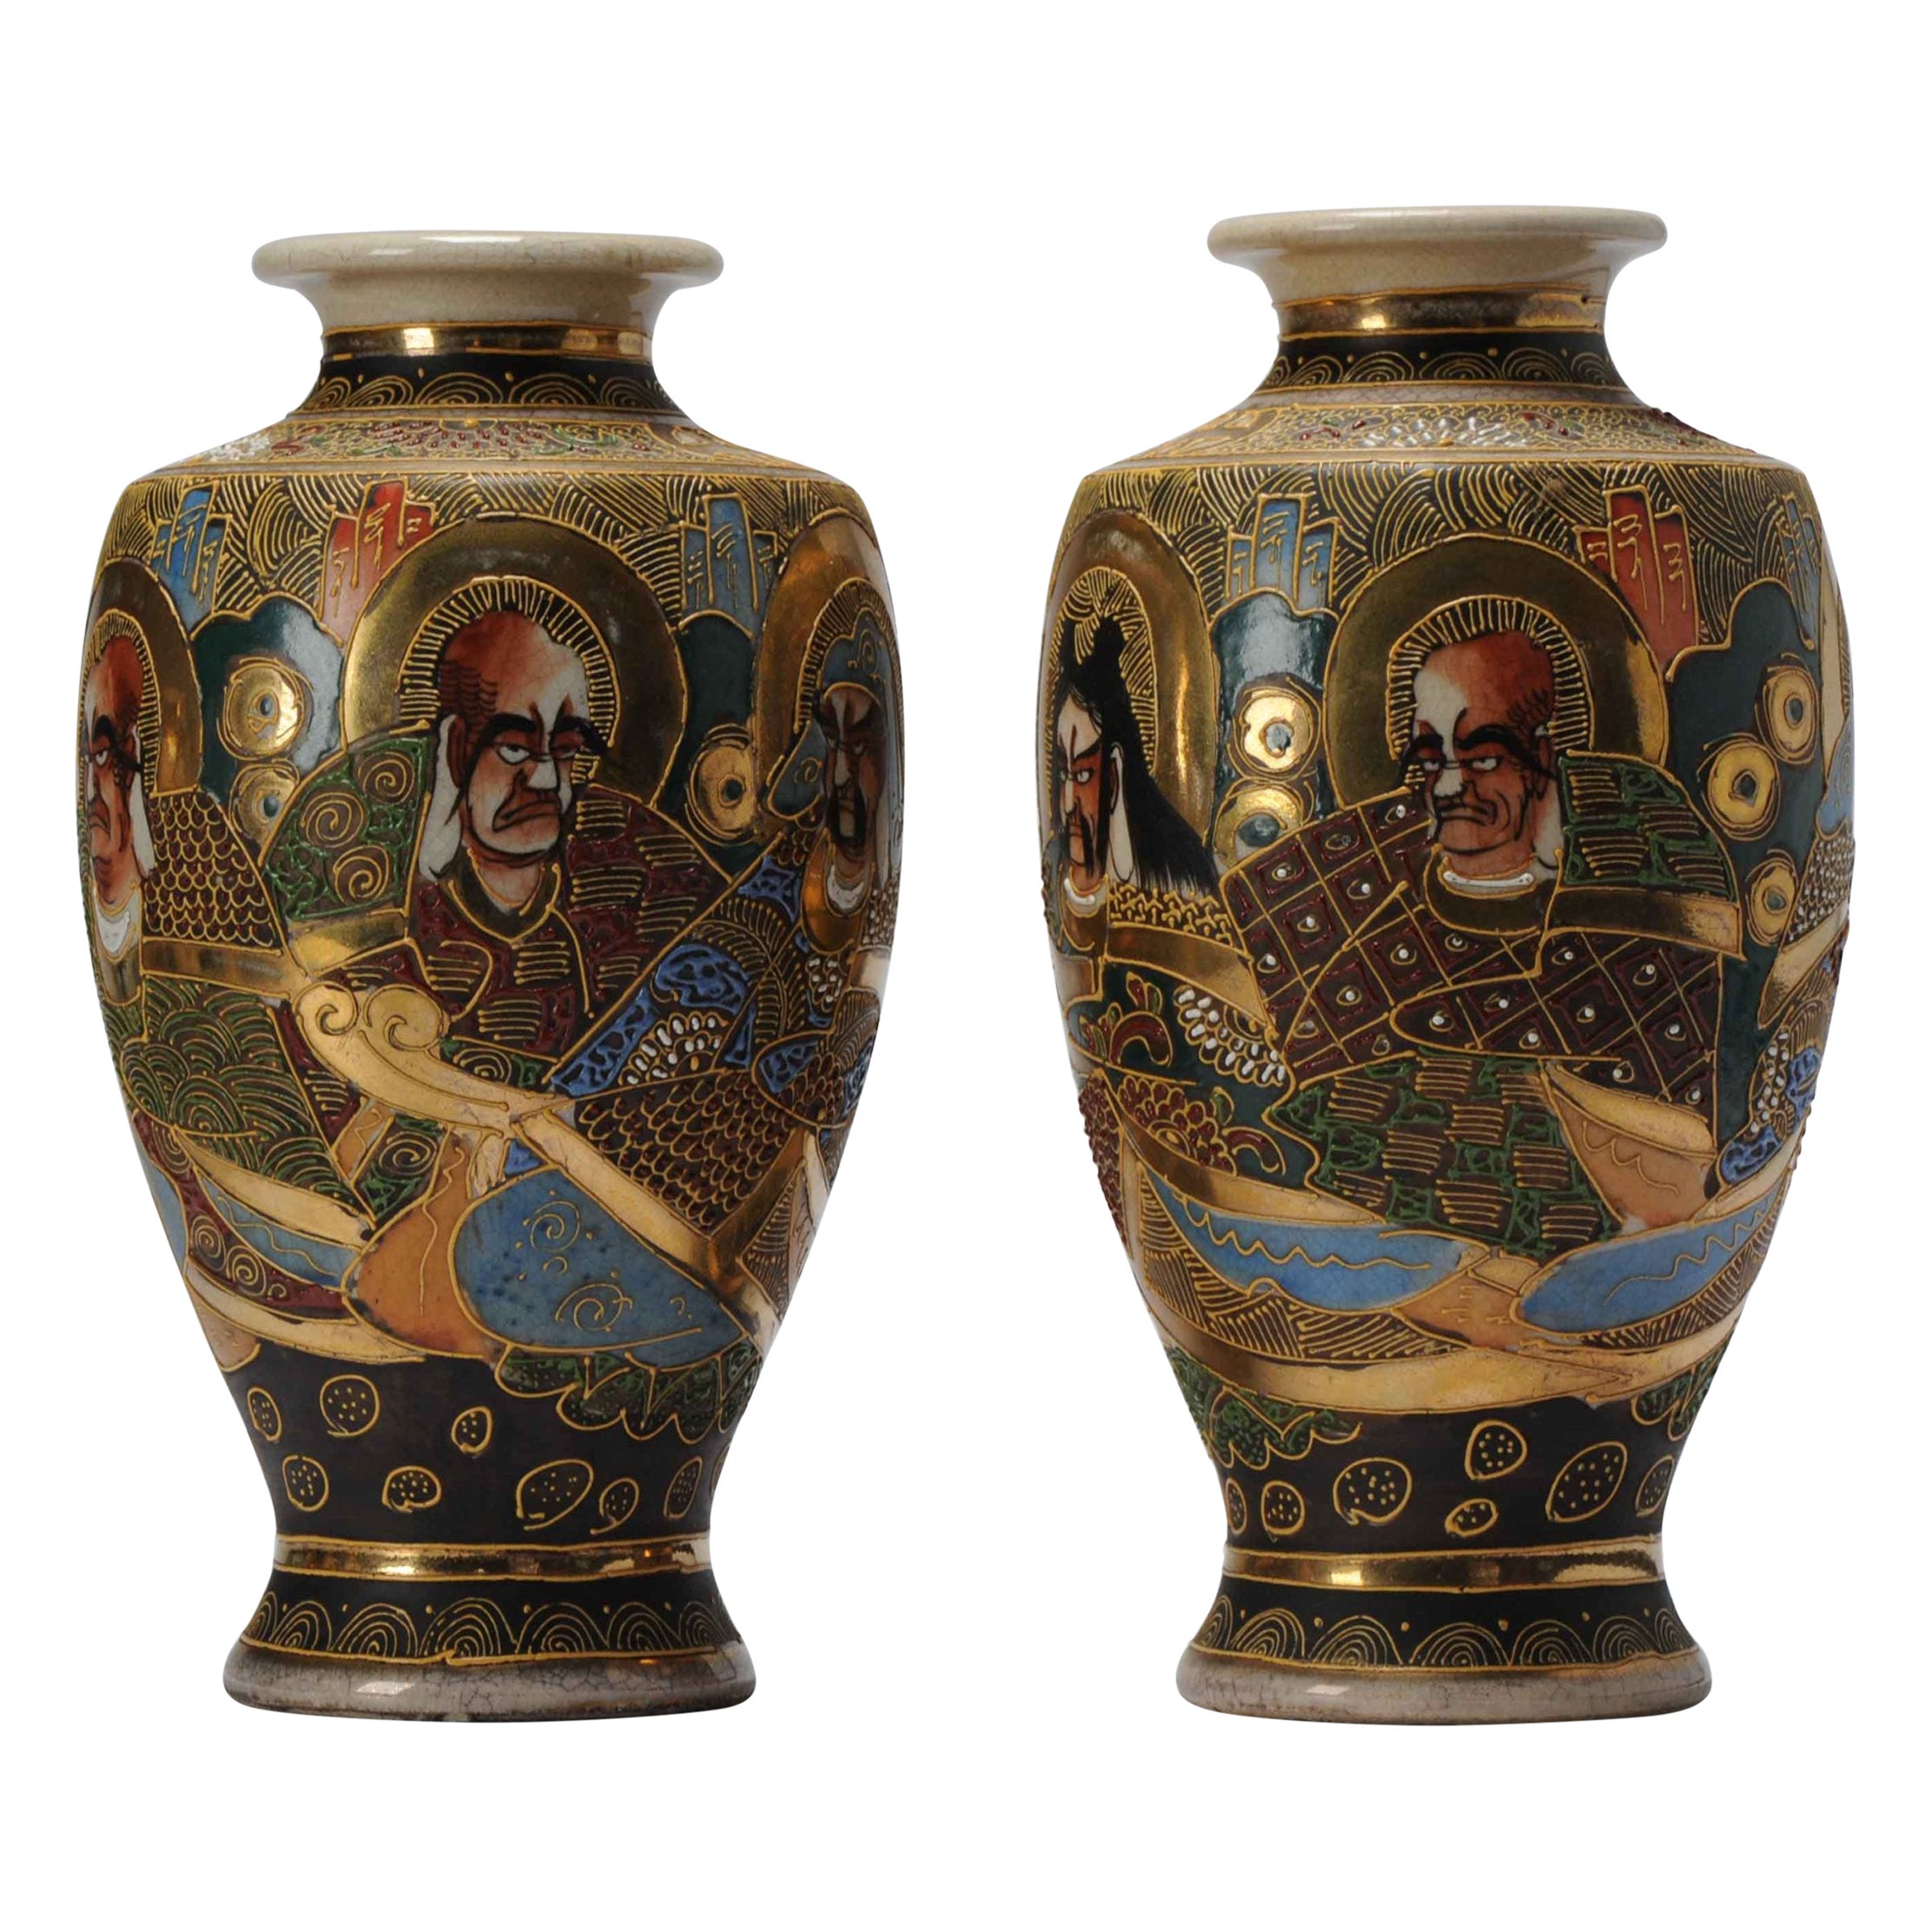 Pair of Antique/Vintage Satsuma Vases with Figures/Arhats Marked, 20th Century